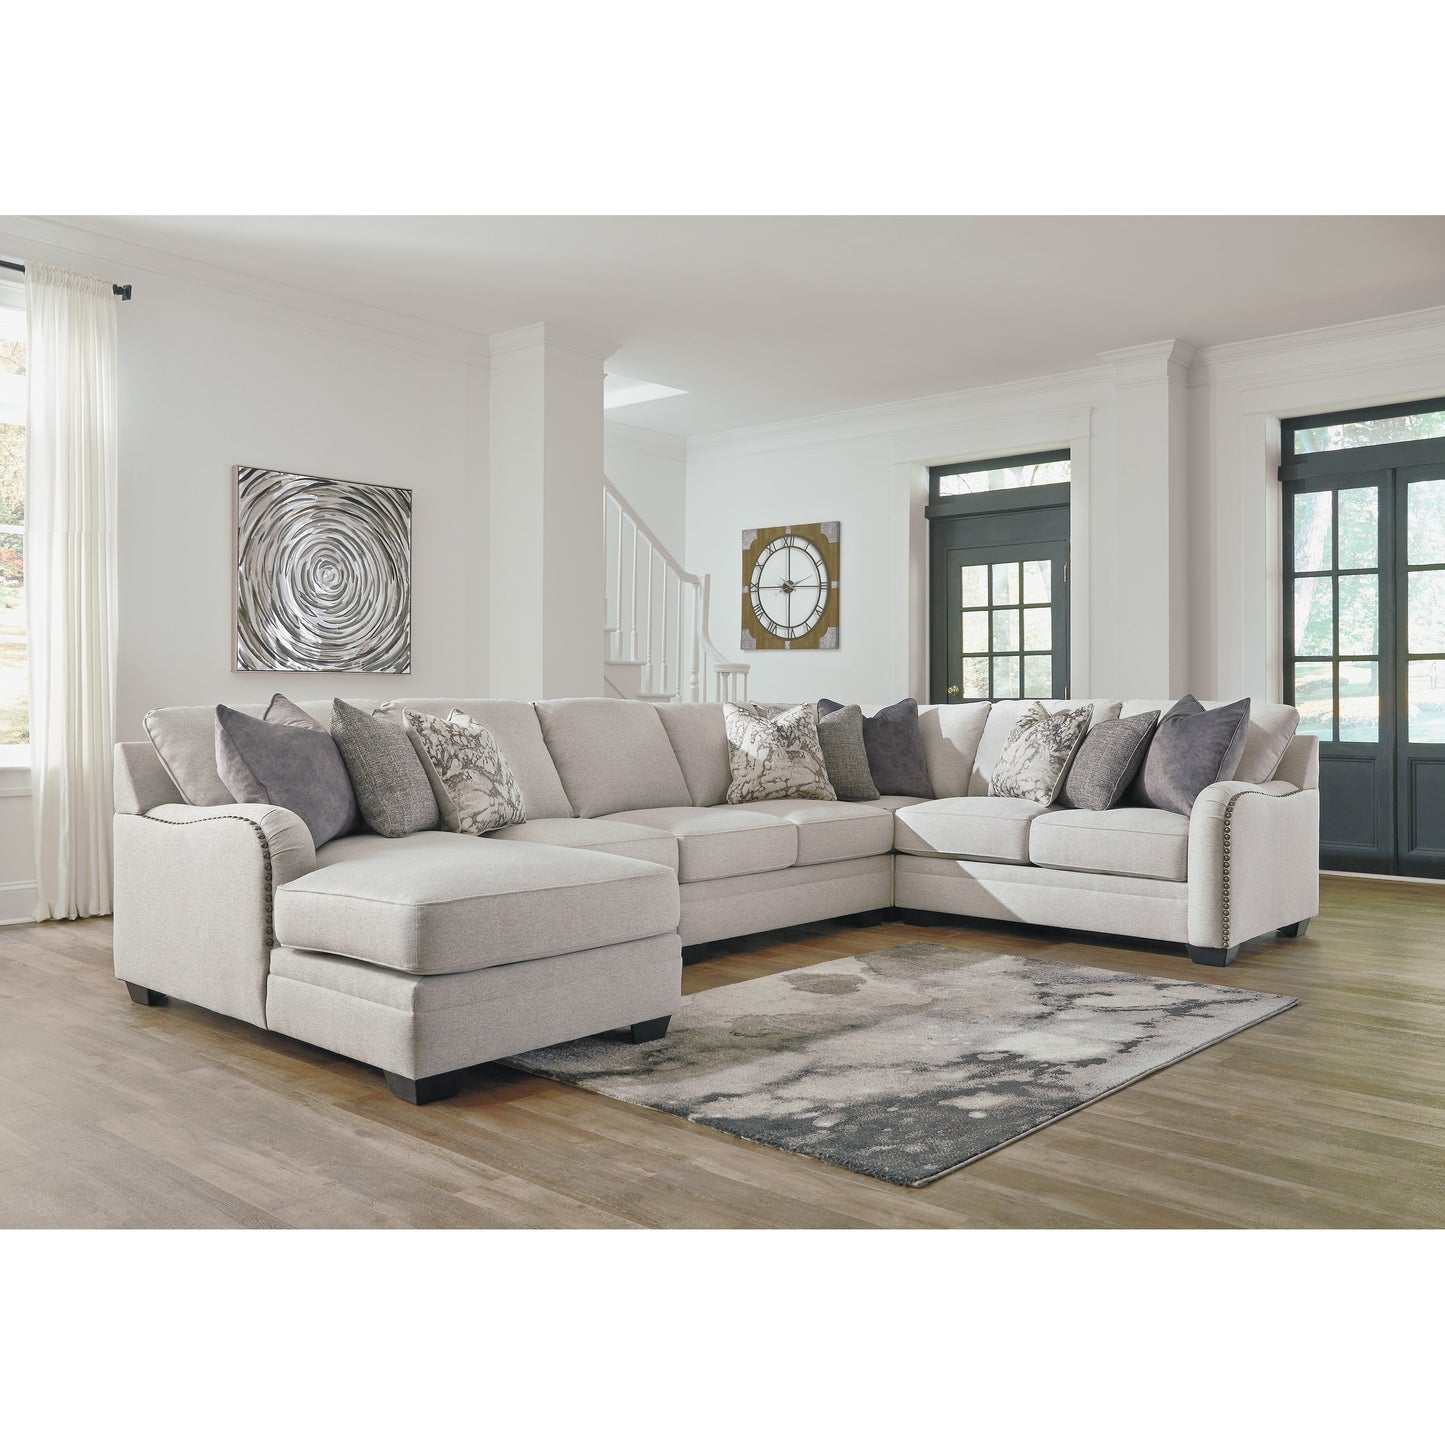 DELLARA 5 PC SECTIONAL WITH CHAISE - CHALK